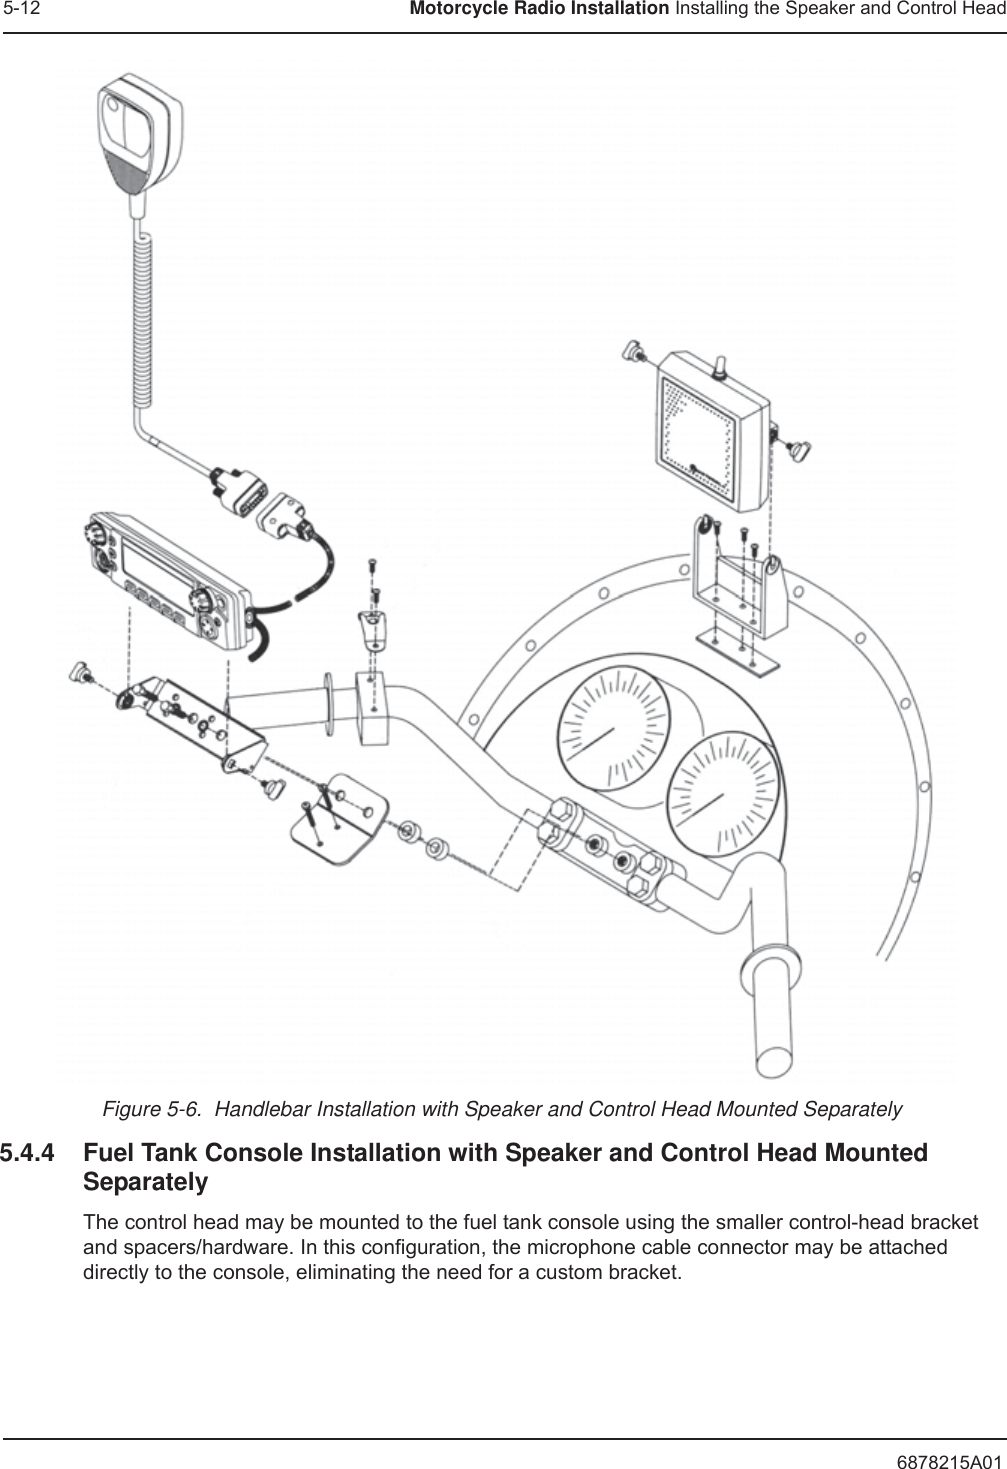 6878215A015-12 Motorcycle Radio Installation Installing the Speaker and Control HeadFigure 5-6.  Handlebar Installation with Speaker and Control Head Mounted Separately5.4.4 Fuel Tank Console Installation with Speaker and Control Head Mounted SeparatelyThe control head may be mounted to the fuel tank console using the smaller control-head bracket and spacers/hardware. In this configuration, the microphone cable connector may be attached directly to the console, eliminating the need for a custom bracket.